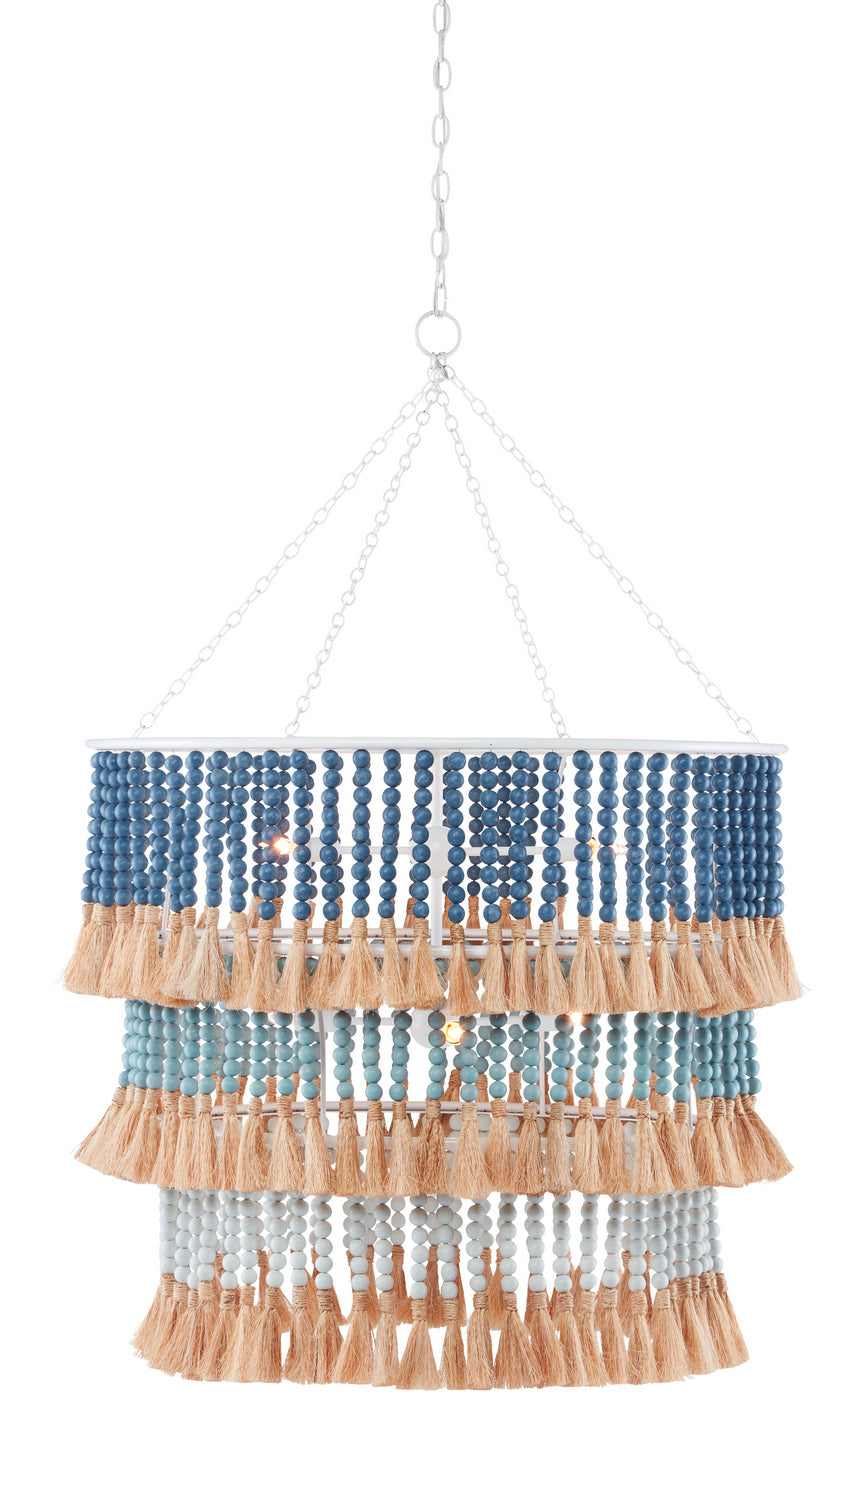 Seven Light Chandelier from the Jamie Beckwith collection in Sugar White/Mist Blue/Demin Blue/Natural Rope finish